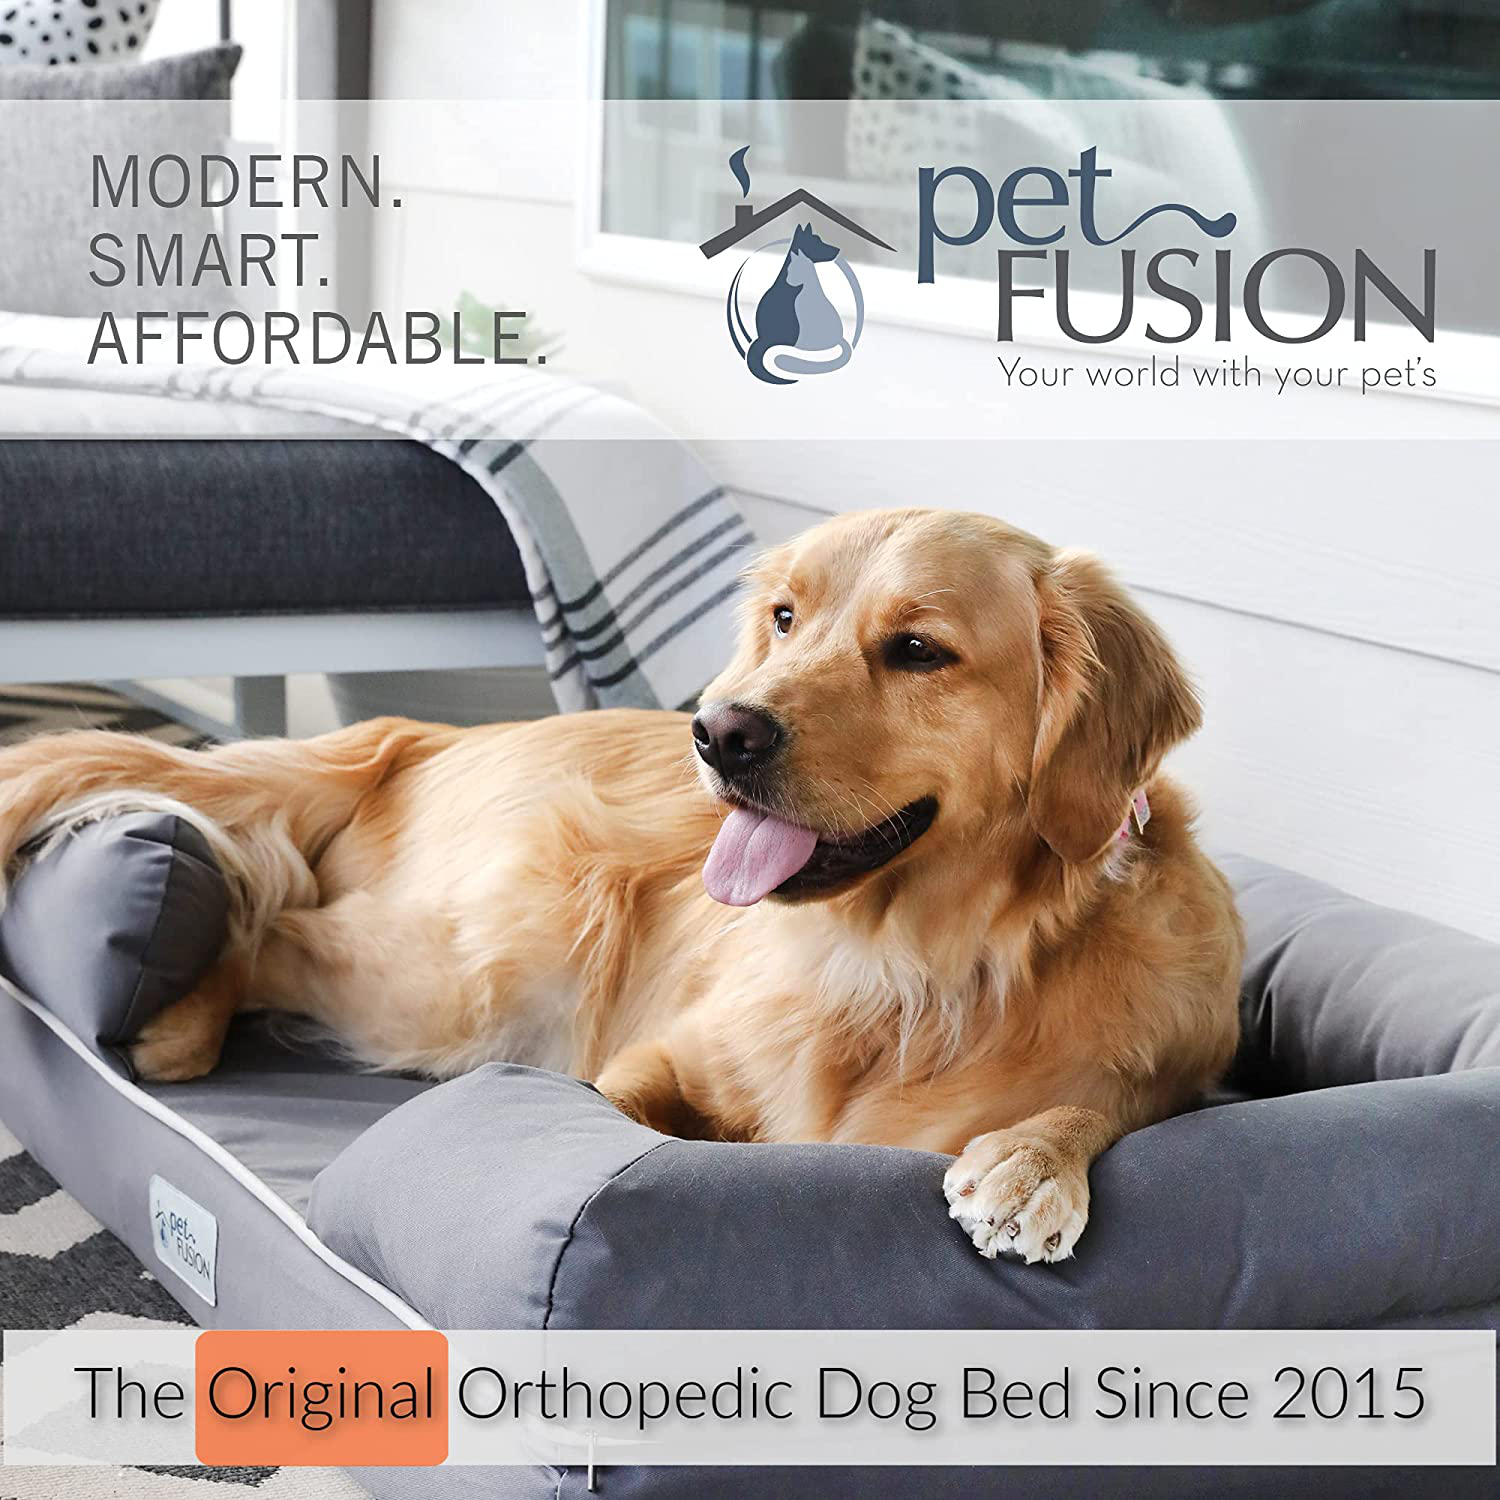 Petfusion Ultimate Orthopedic Dog Bed | Solid Certipur-Us Memory Foam | Multiple Sizes/Colors, Medium Firmness Bolster, Waterproof Liner, Breathable 35% Cotton Cover | Cert. Skin Safe | 3Yr Warranty Animals & Pet Supplies > Pet Supplies > Cat Supplies > Cat Beds PetFusion   